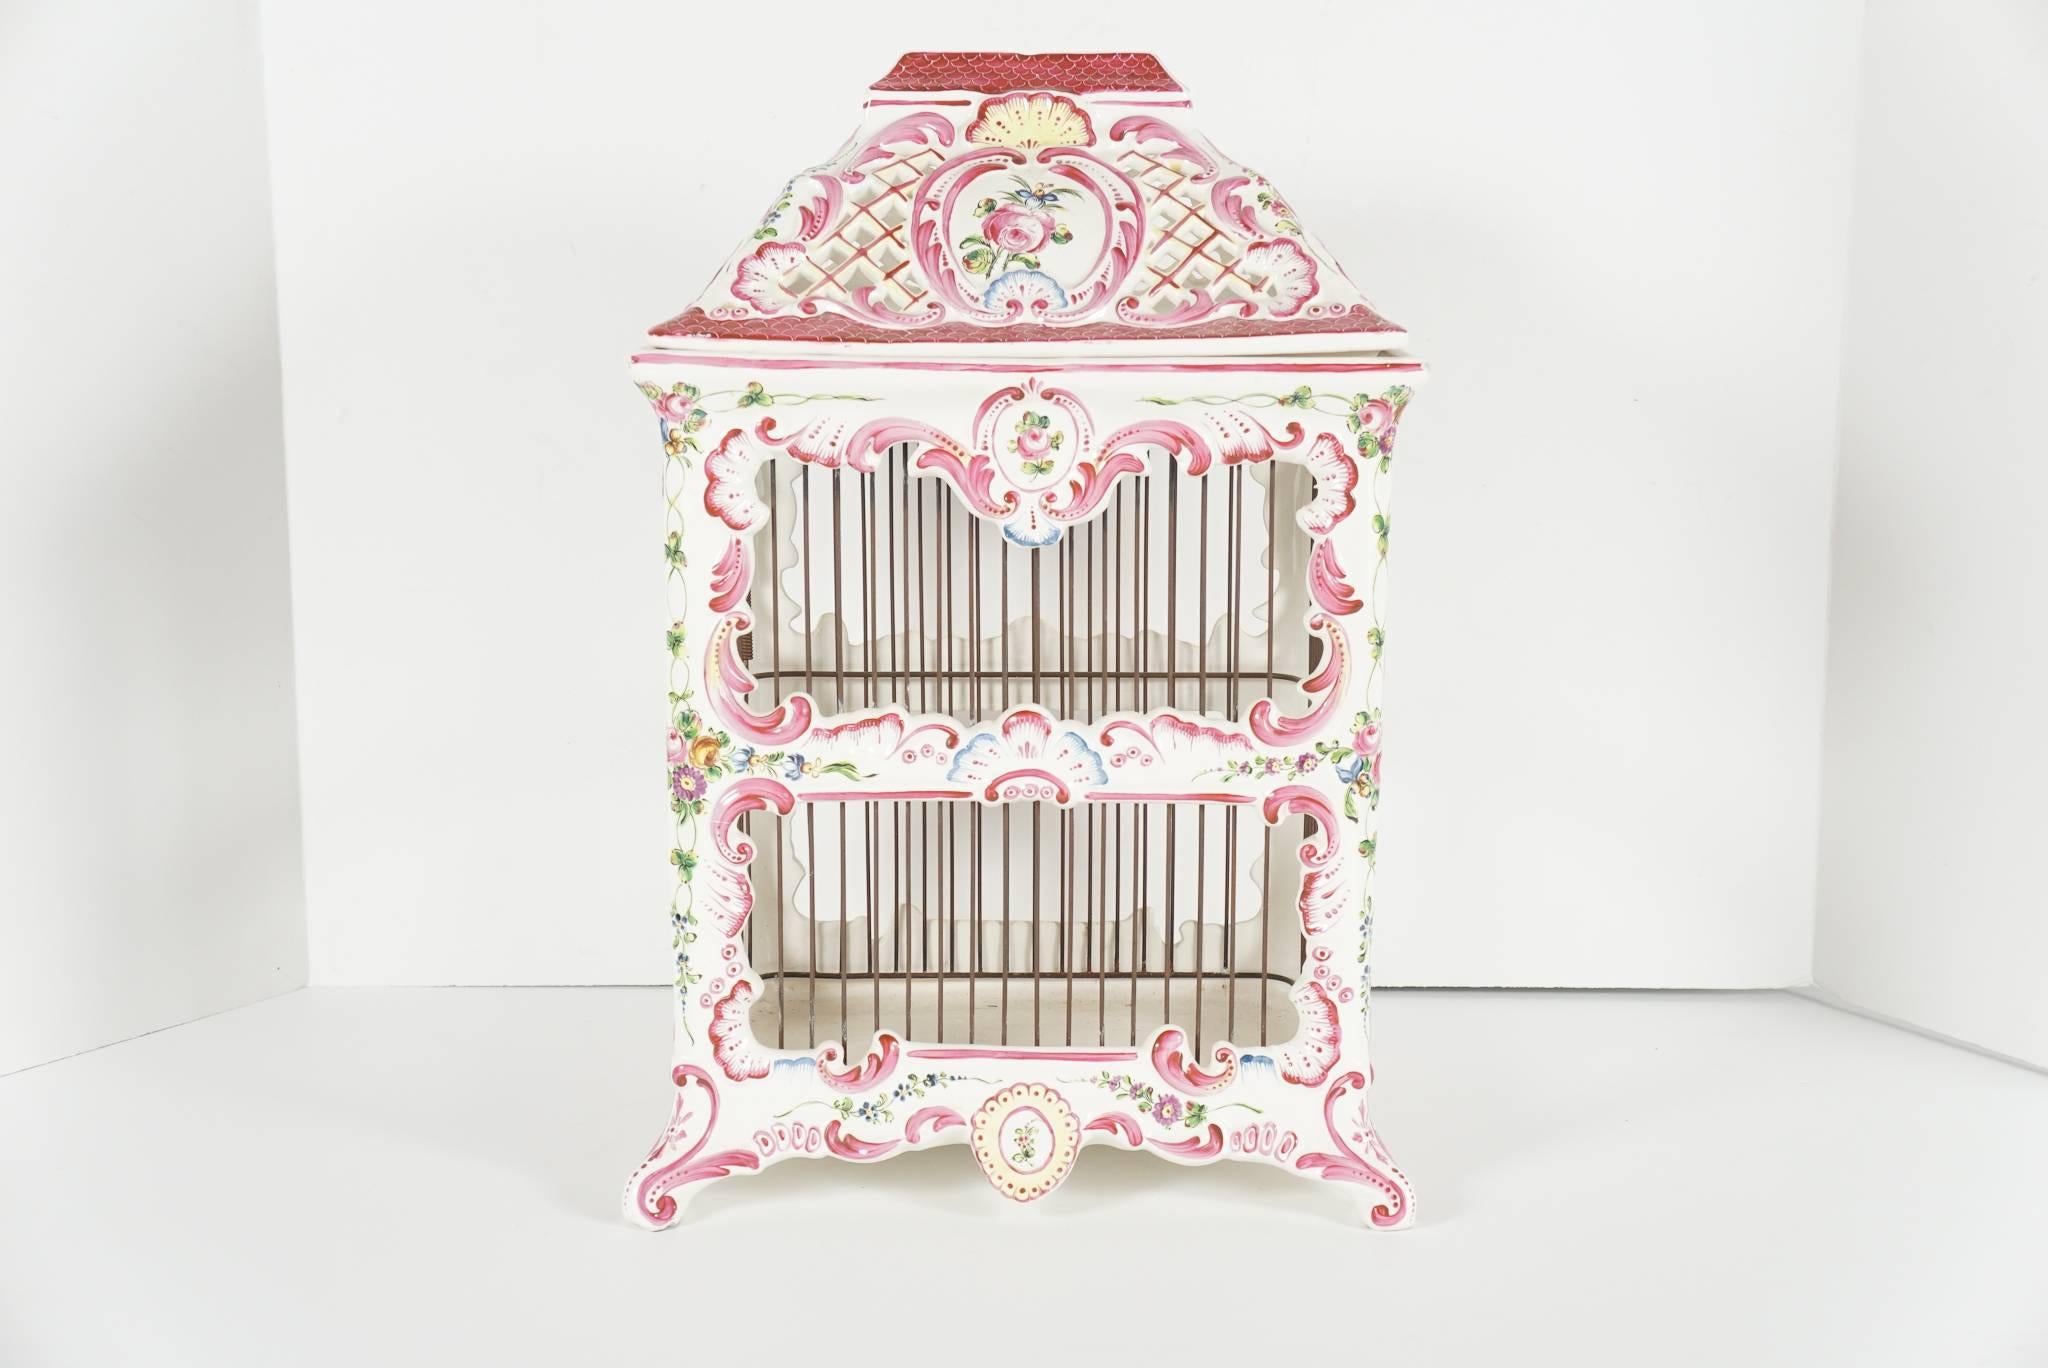 This fine working bird cage made from hand-painted and glazed faience was made in France during the 1960s. Produced at Atelier De Sergies one of Frances finest ceramic firms with a long and storied career. The top is removable and the door to the